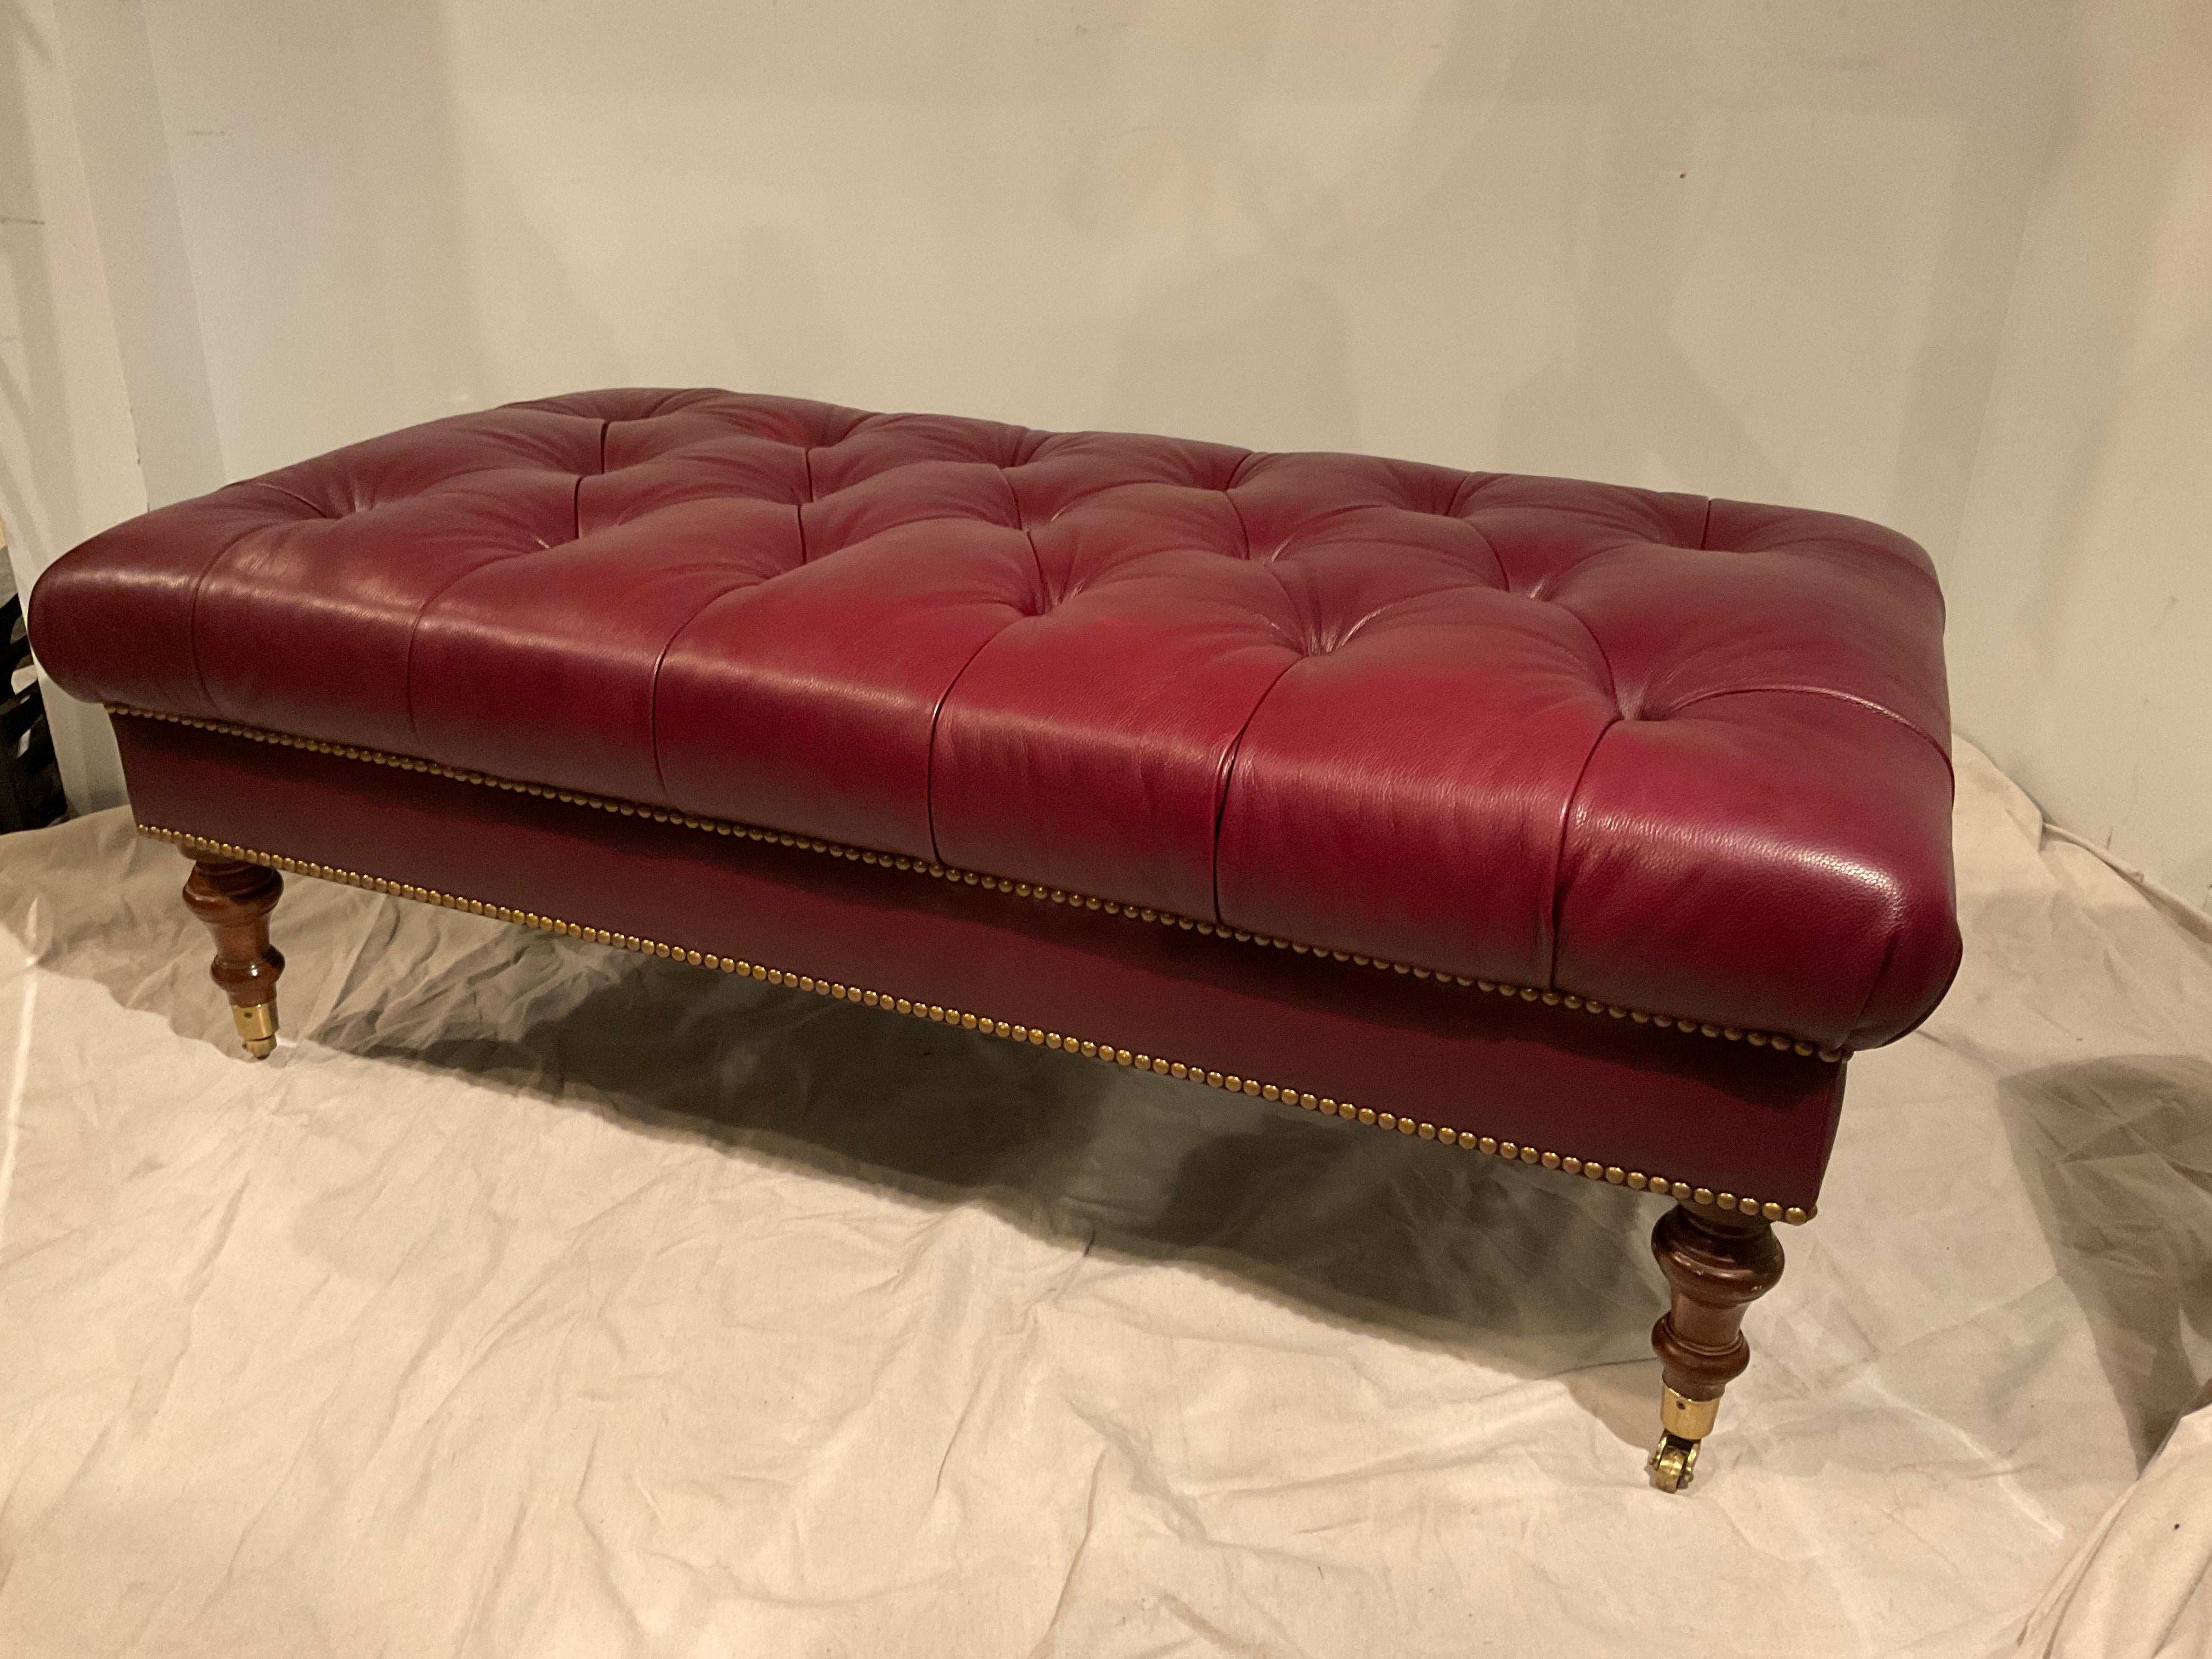 Edward Ferrell red leather tufted ottoman on brass casters. Light spot on leather as shown in image 7.